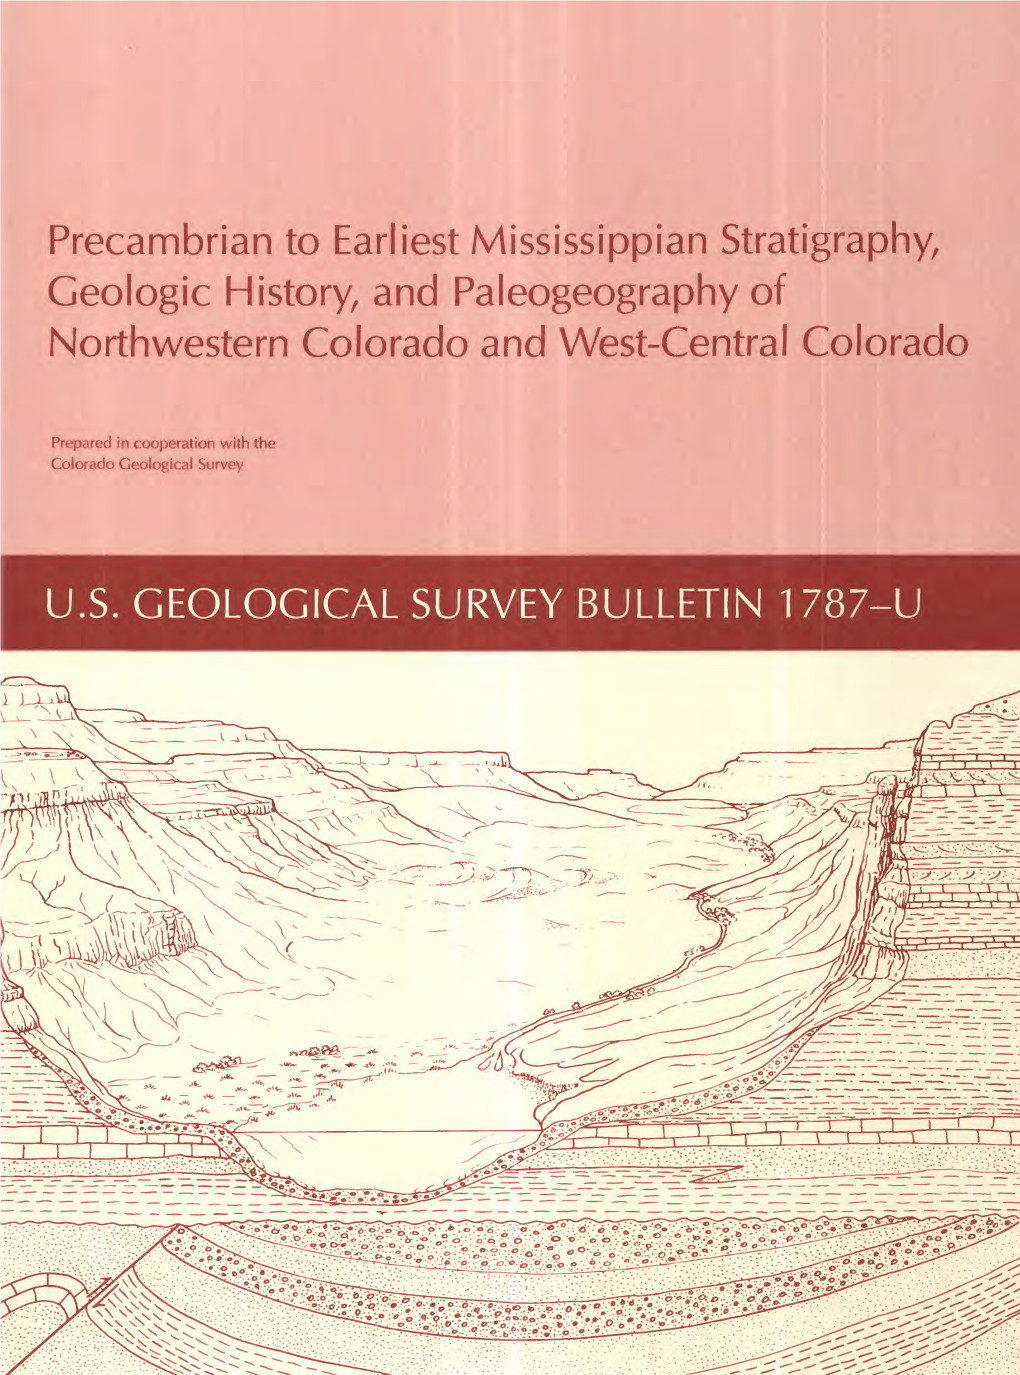 Precambrian to Earliest Mississippian Stratigraphy, Geologic History, and Paleogeography of Northwestern Colorado and West-Central Colorado